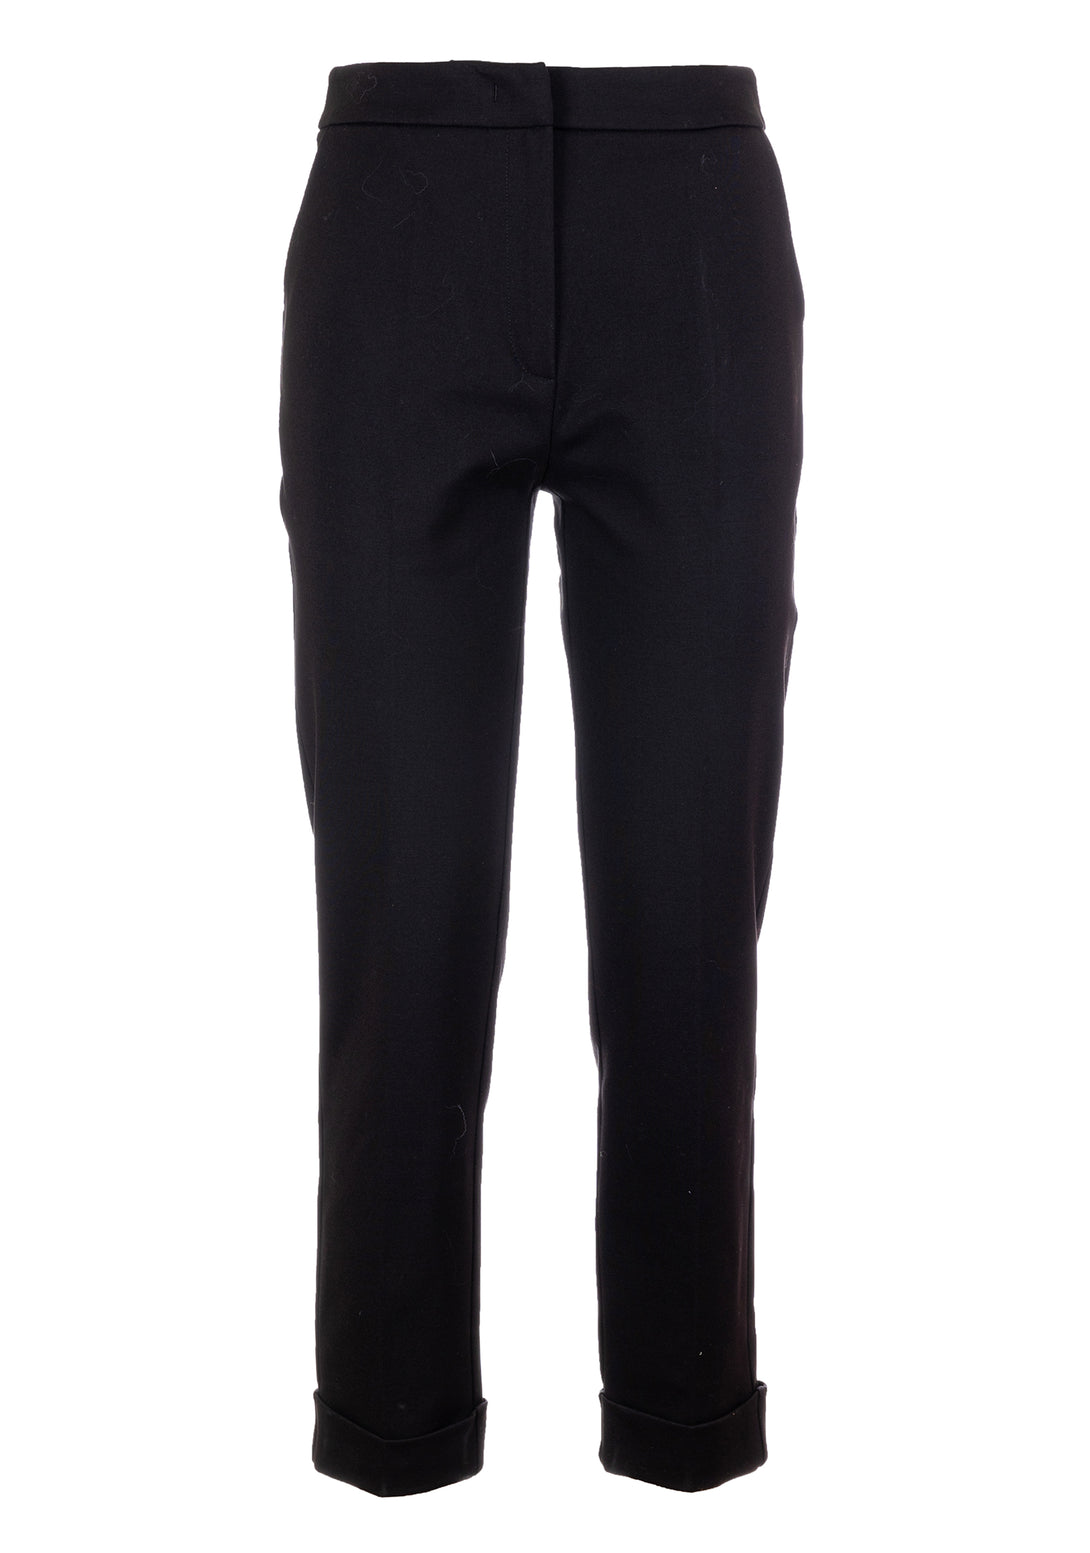 Chino pant slim fit made in Milano stitch fabric